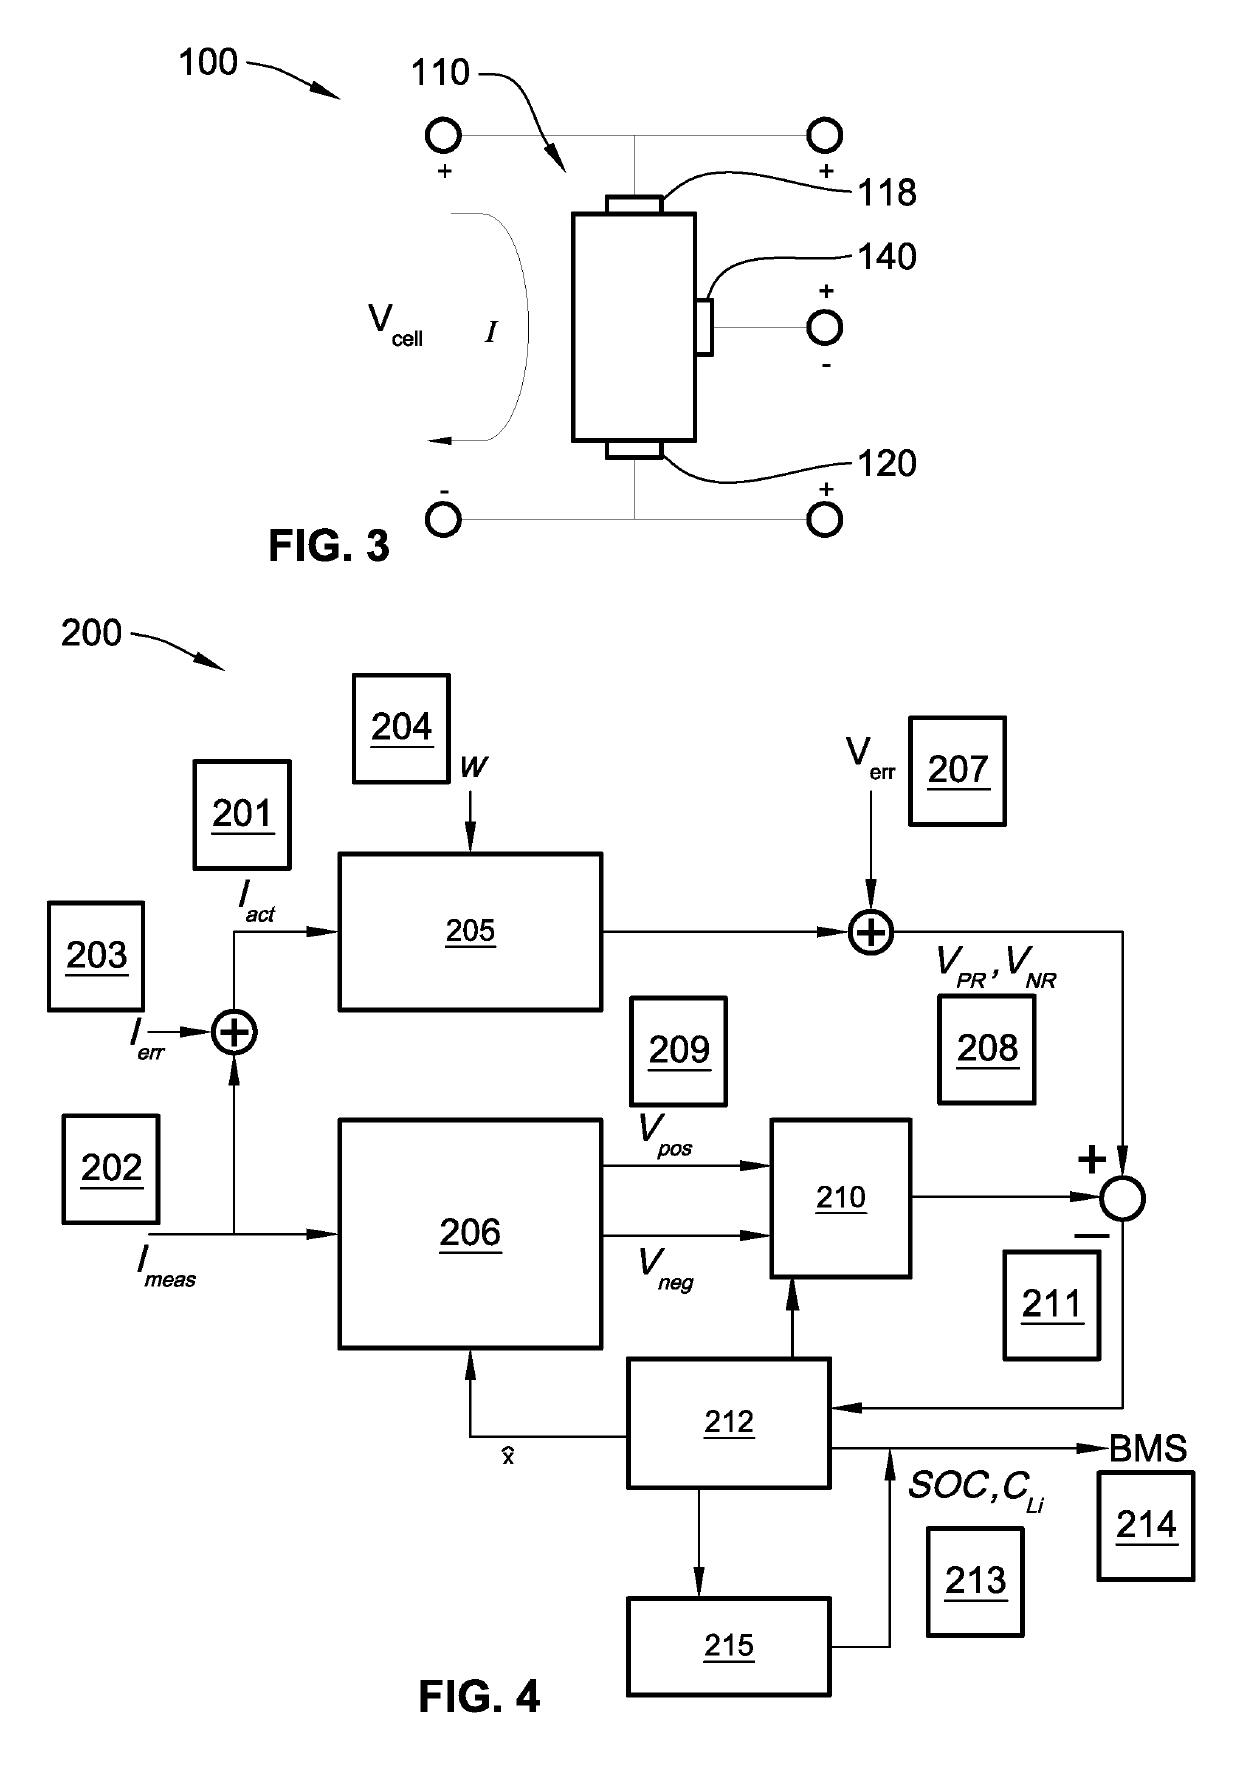 Battery state estimation control logic and architectures for electric storage systems